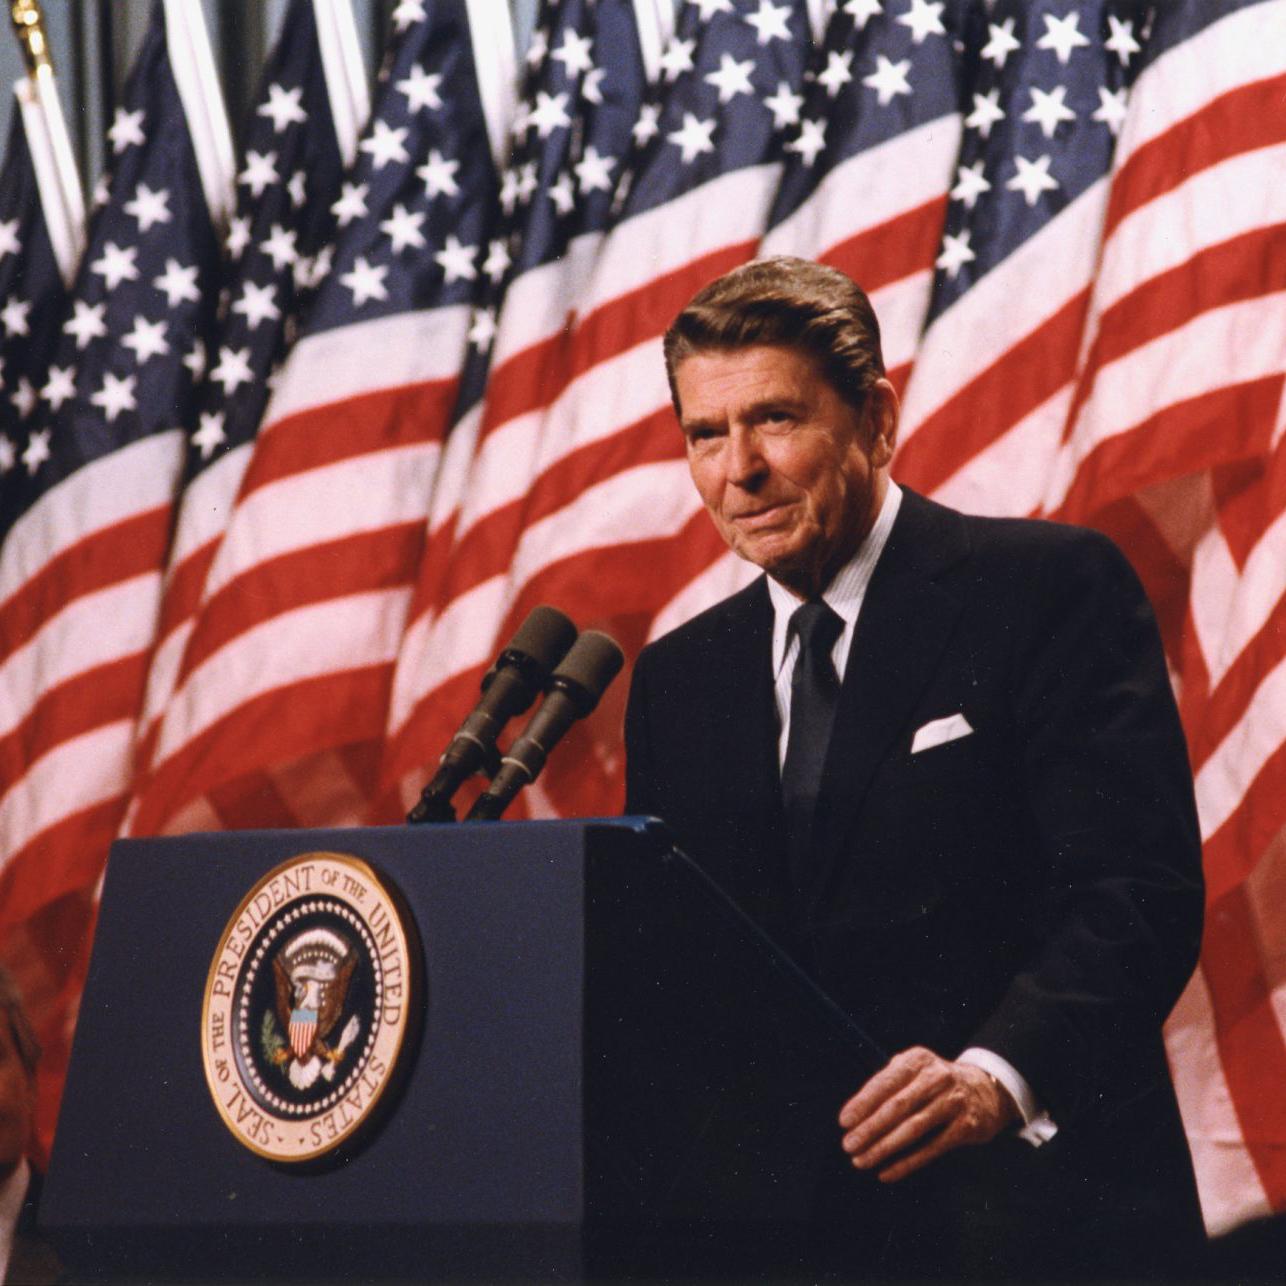 40th President of the United States Ronald Reagan